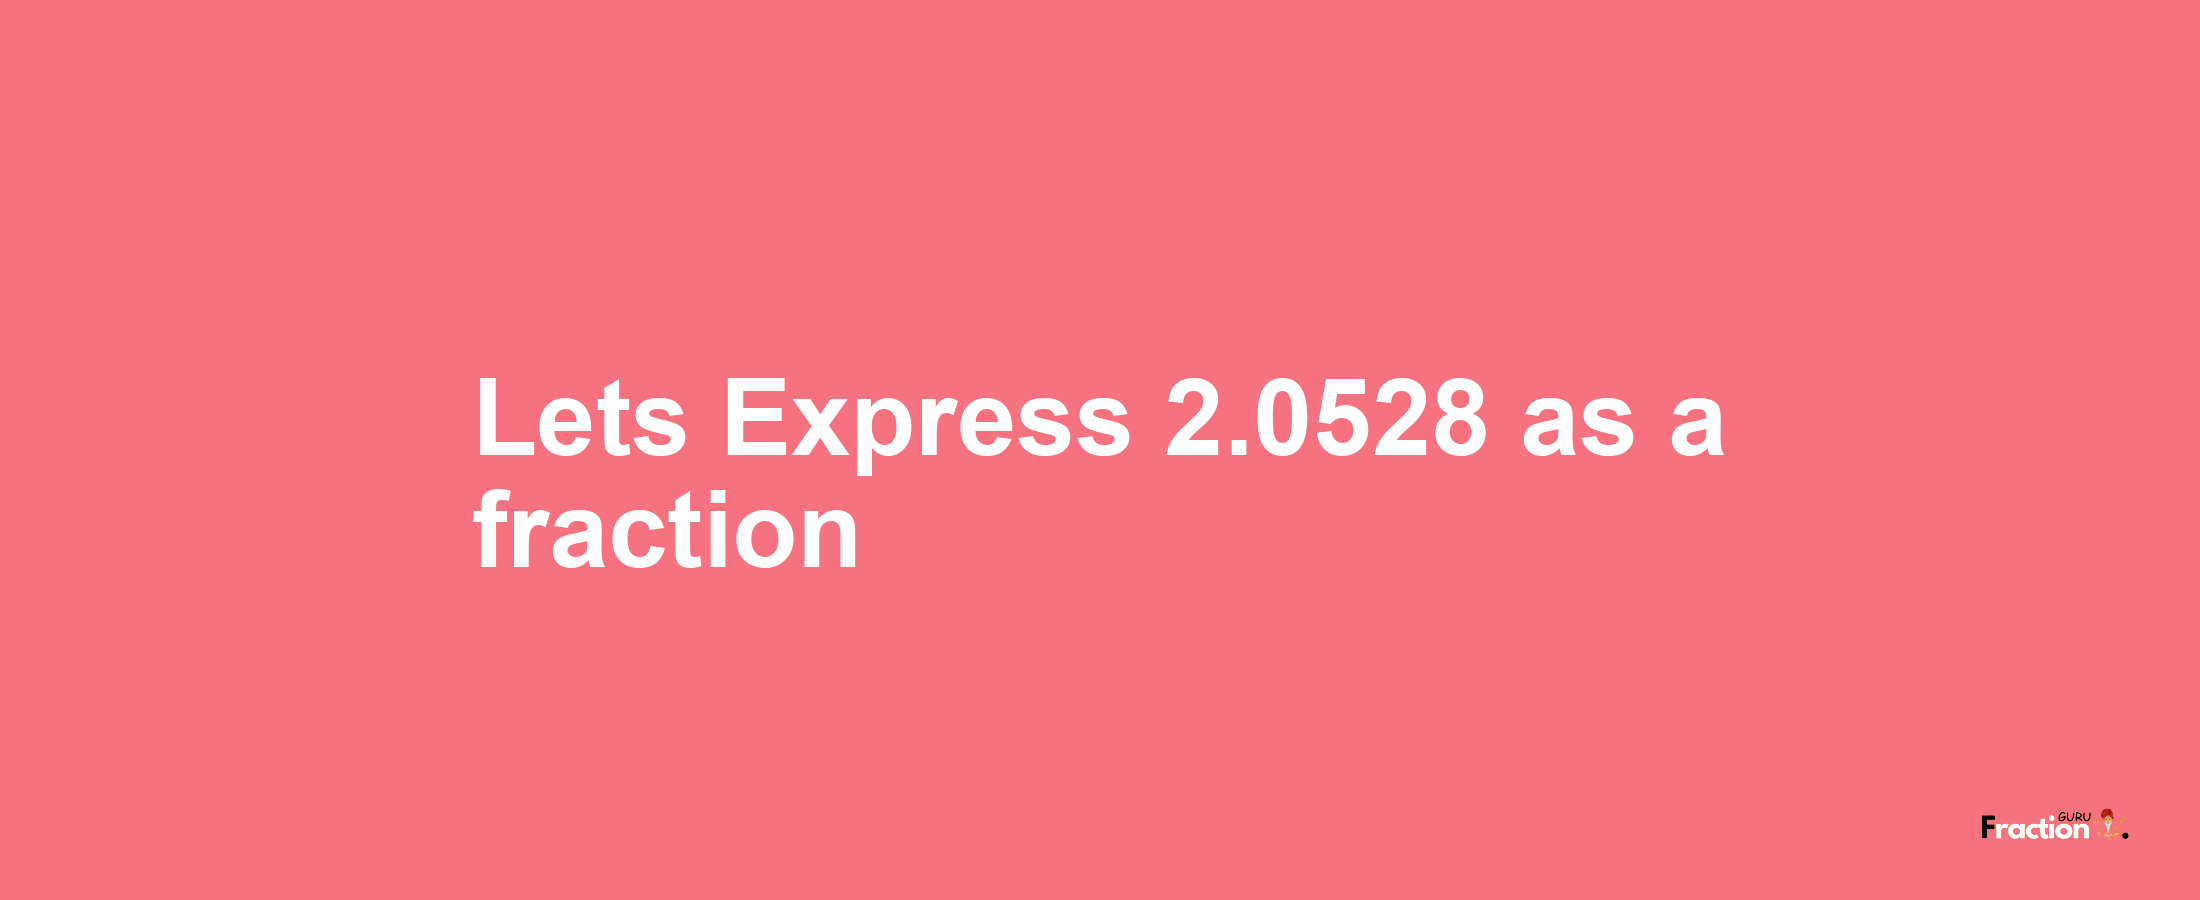 Lets Express 2.0528 as afraction